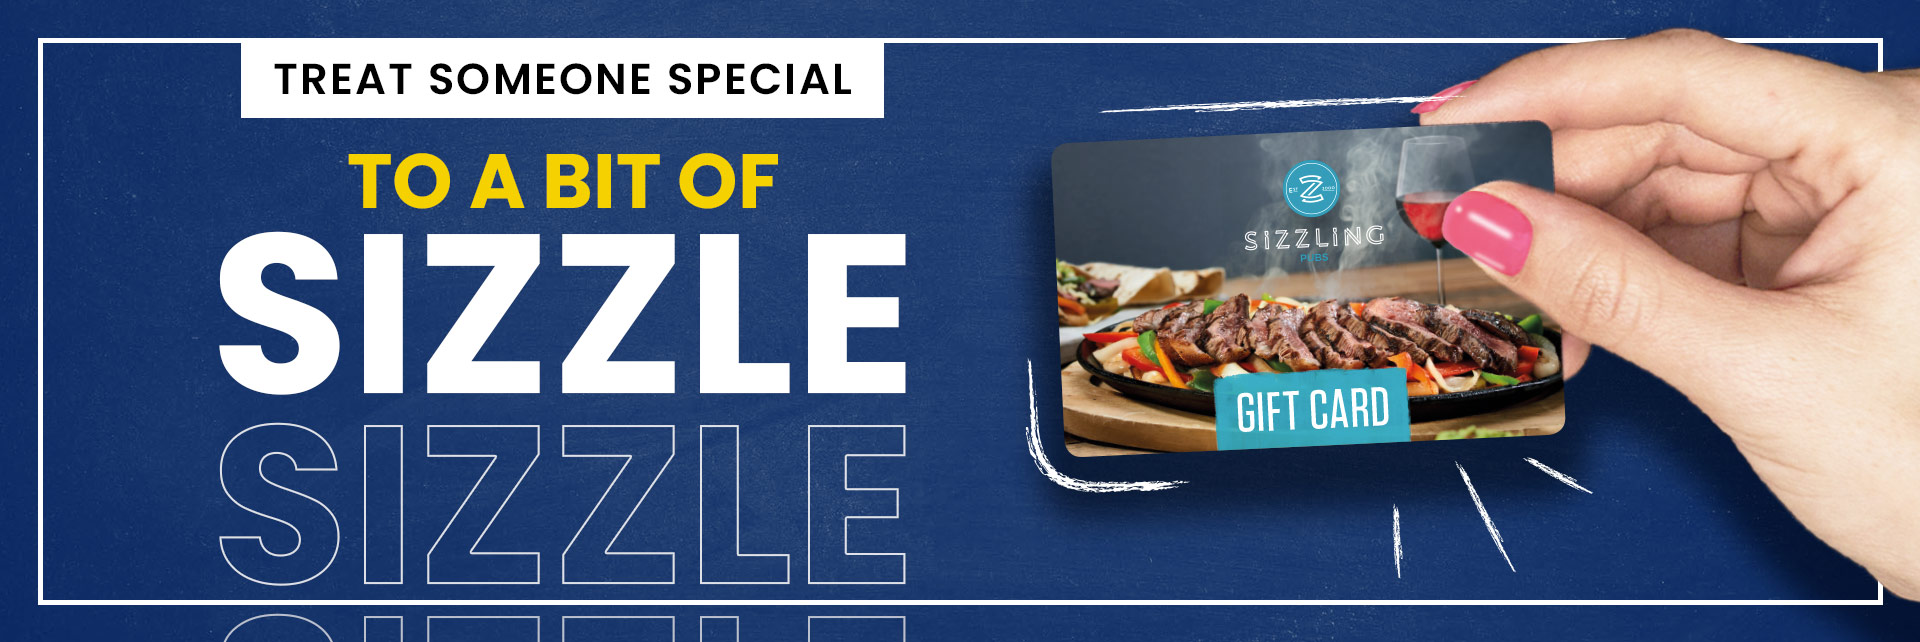 Sizzling Pubs Gift Card at The Tyburn House in Birmingham